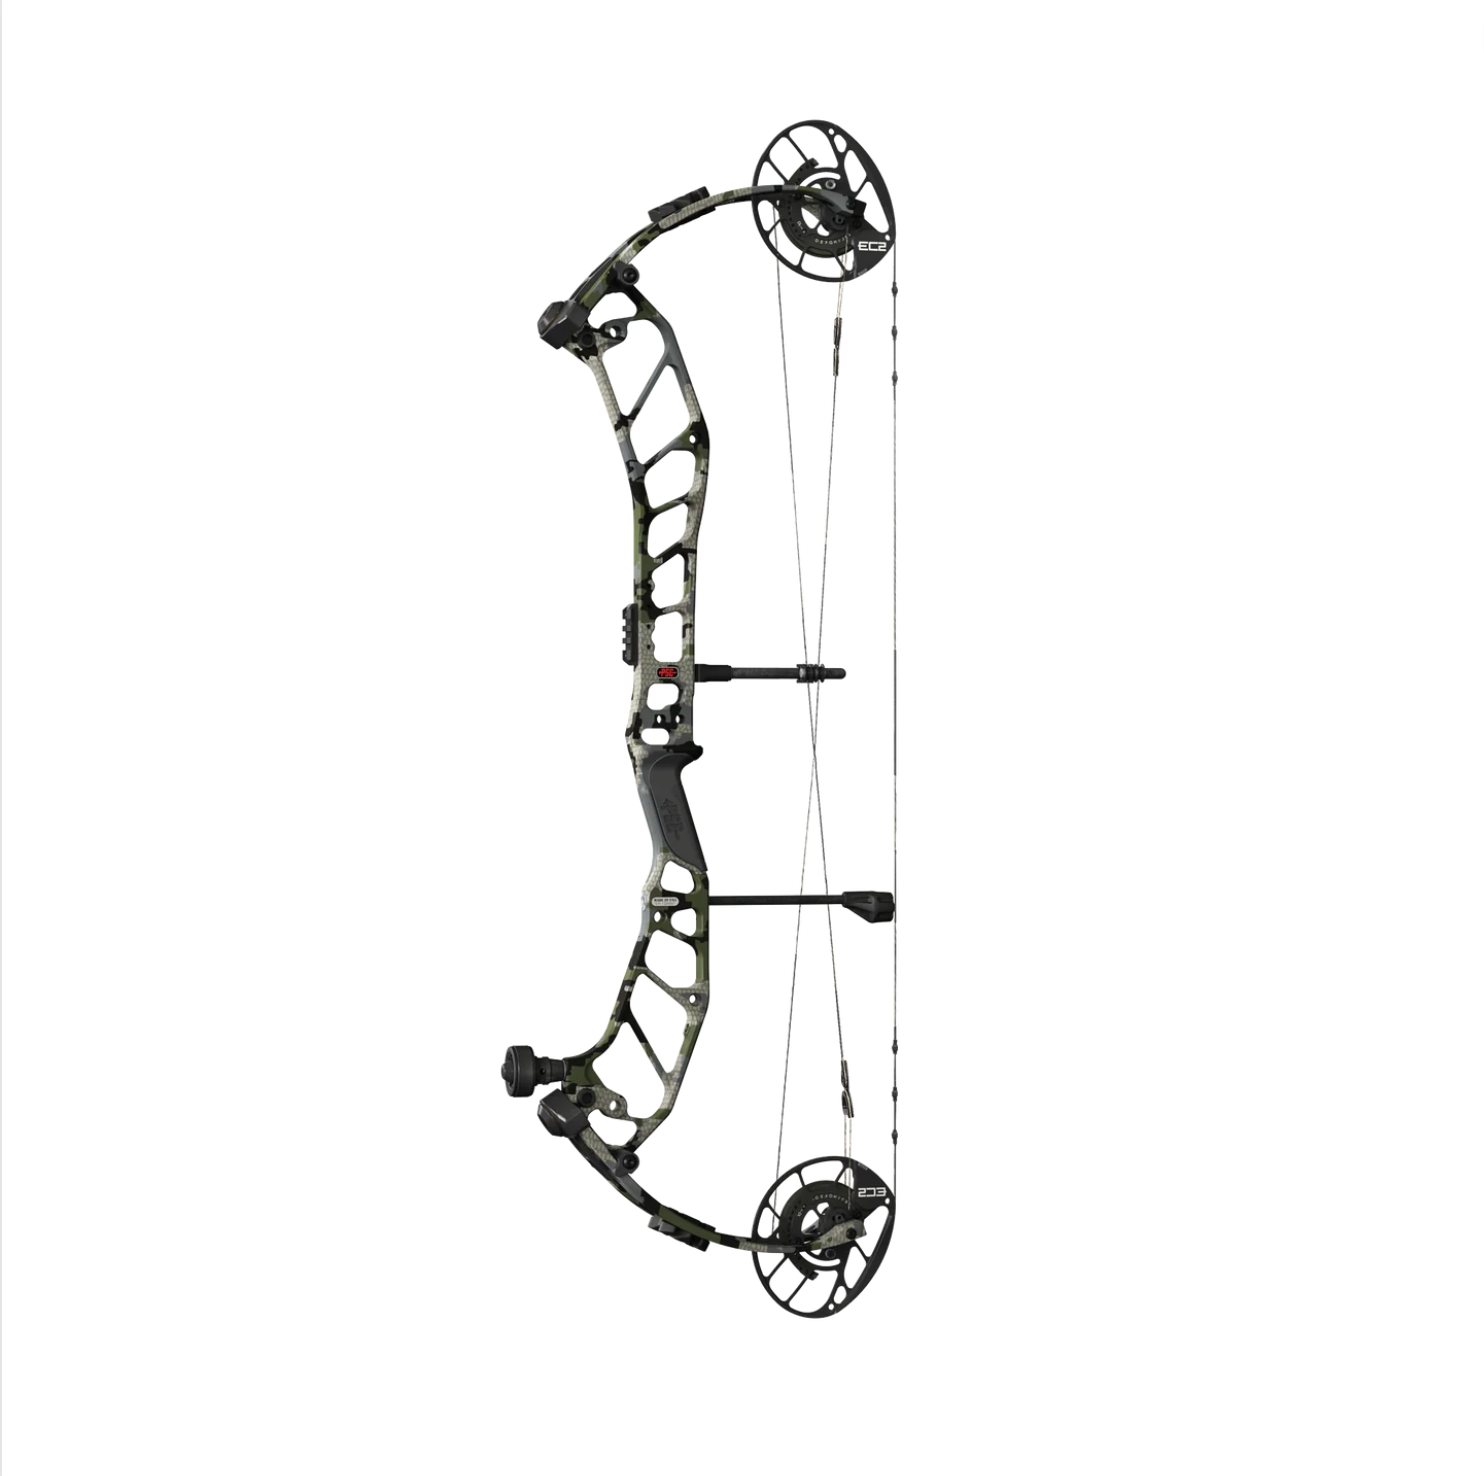 PSE Fortis 33 Compound Bow